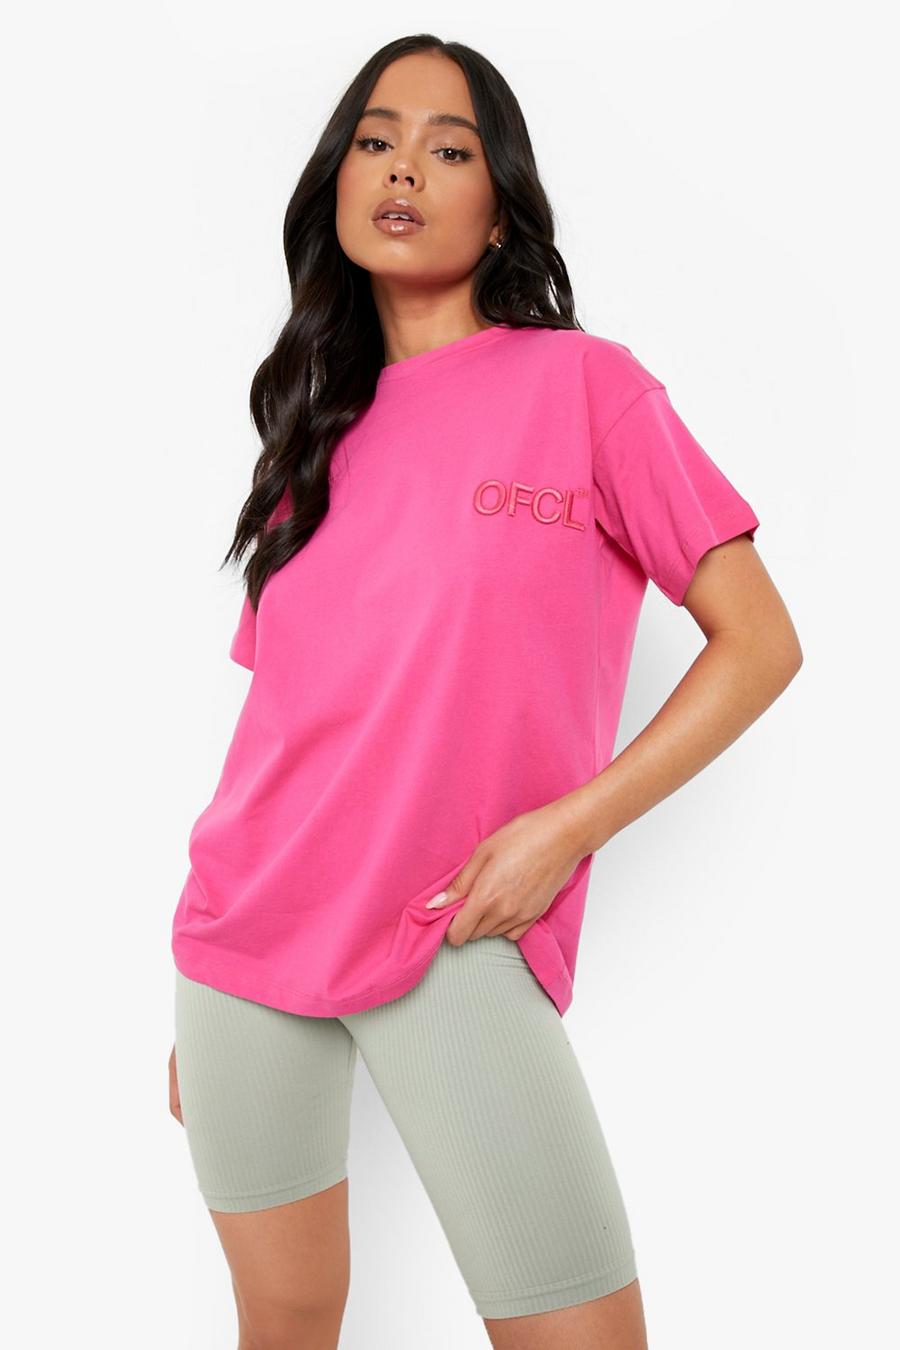 T-shirt Petite Ofcl con ricami, Hot pink image number 1